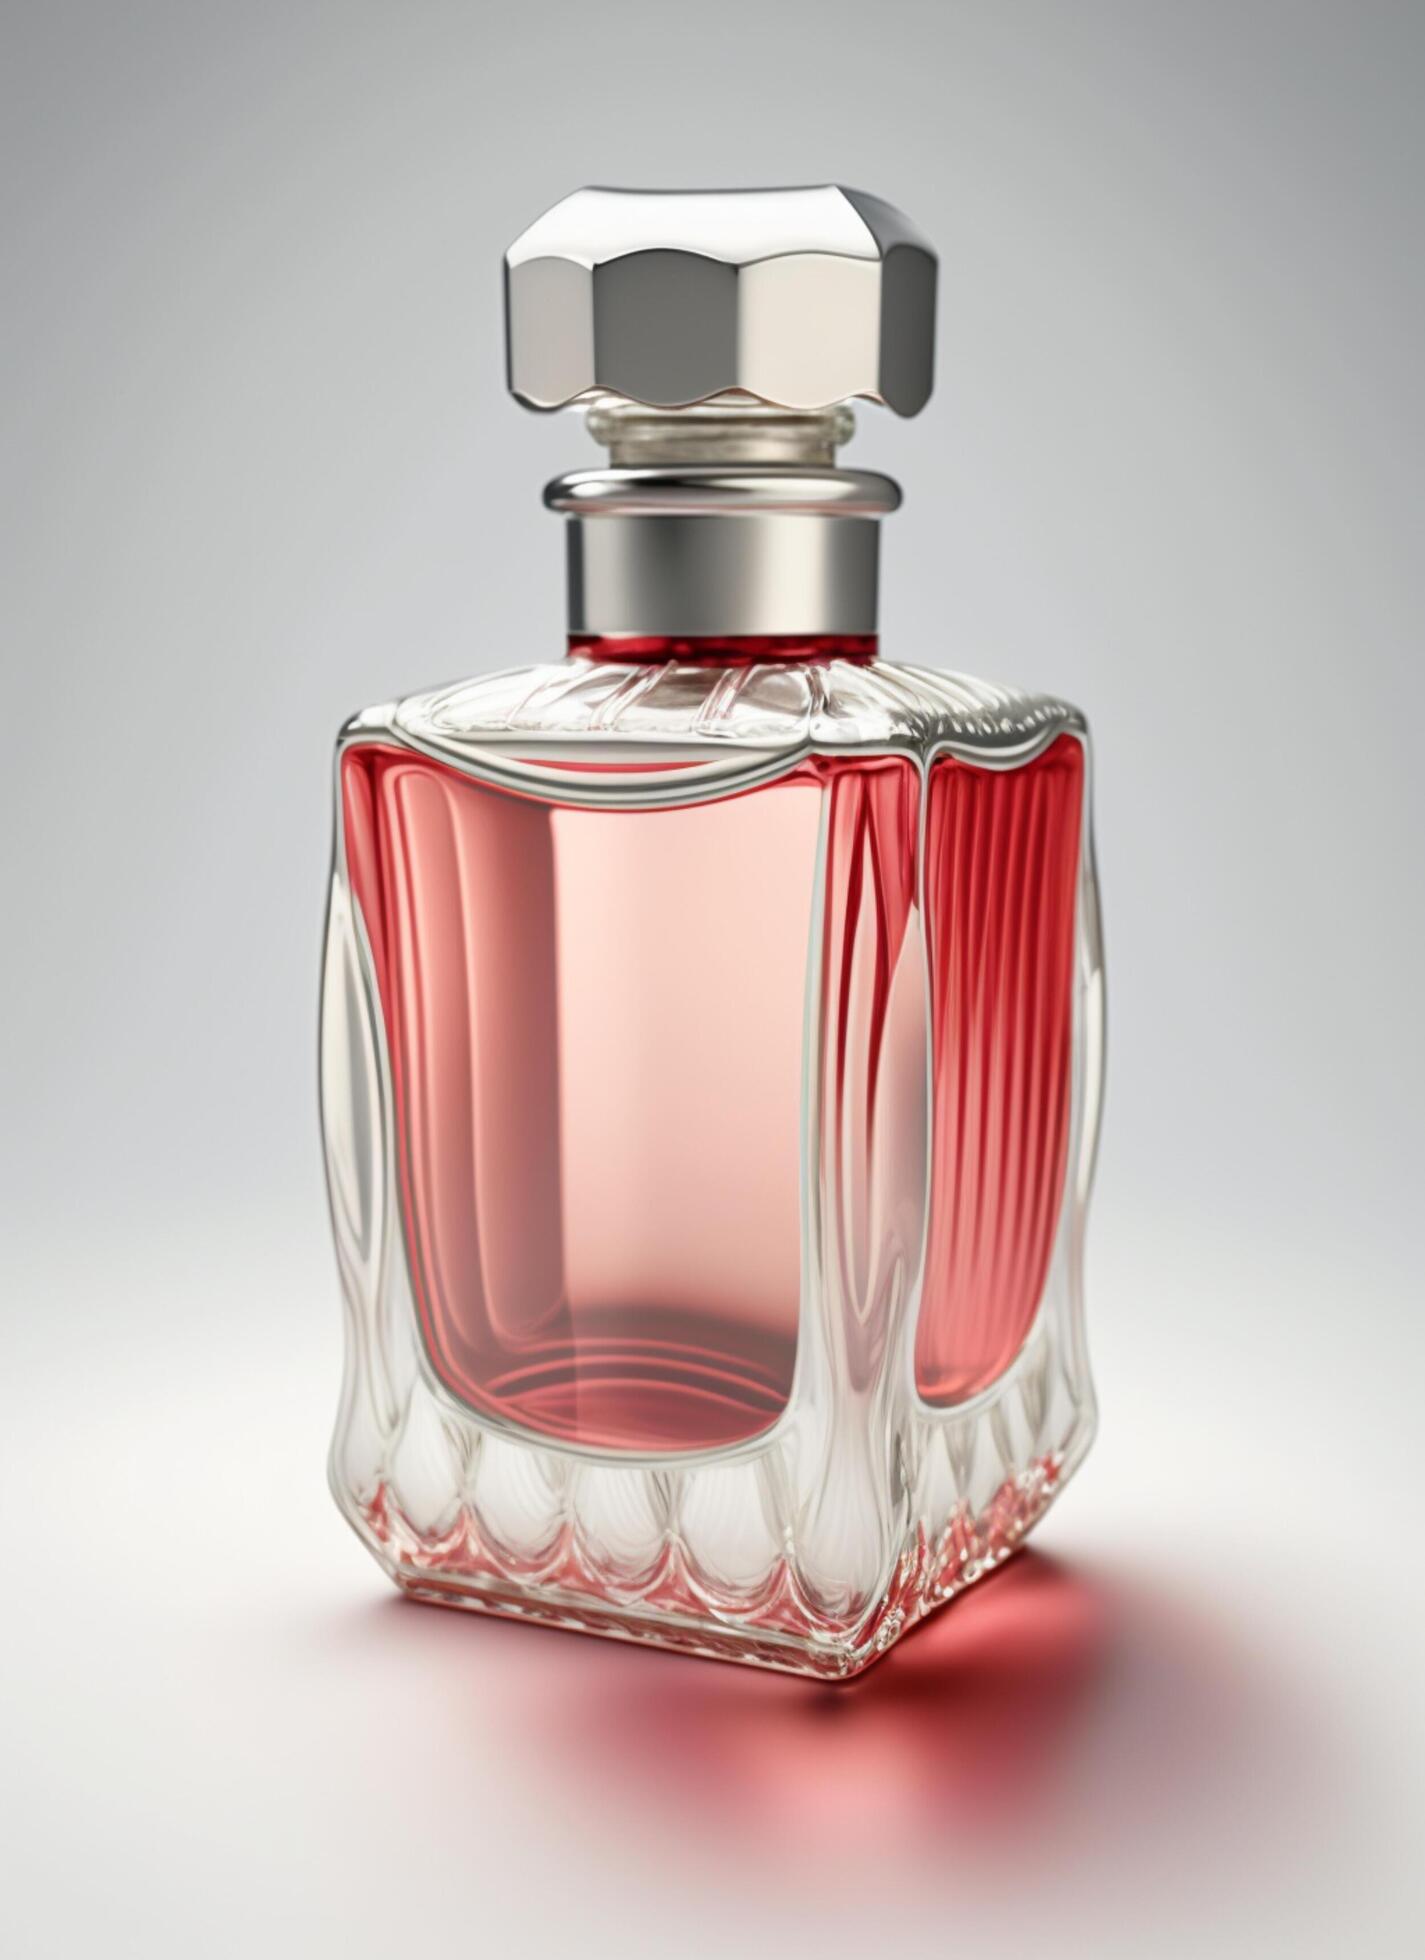 7,000+ Glass Perfume Bottle Pictures